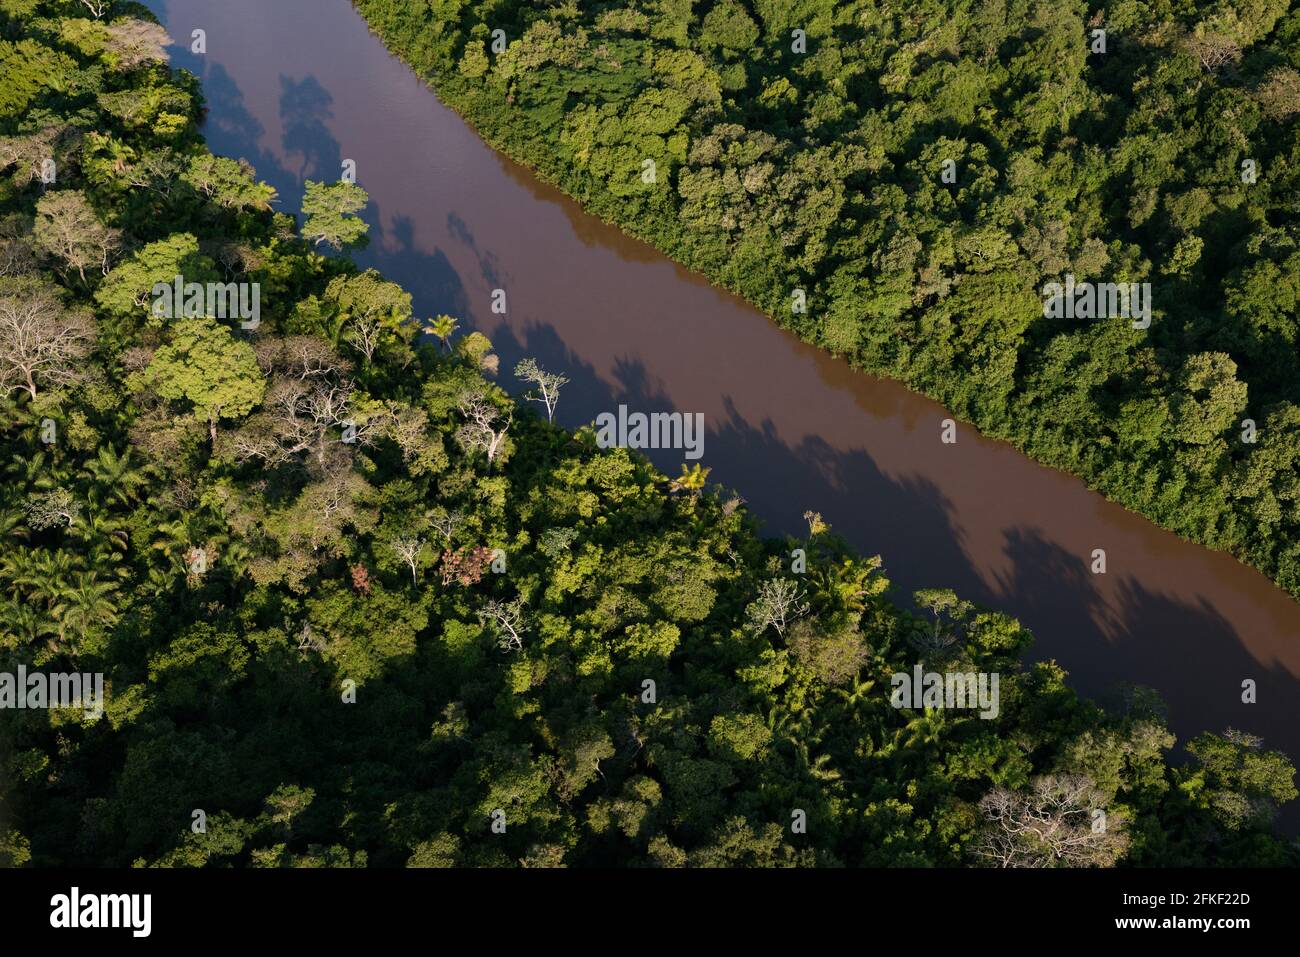 Aquidauana River passing through the forest in South Pantanal, Brazil Stock Photo